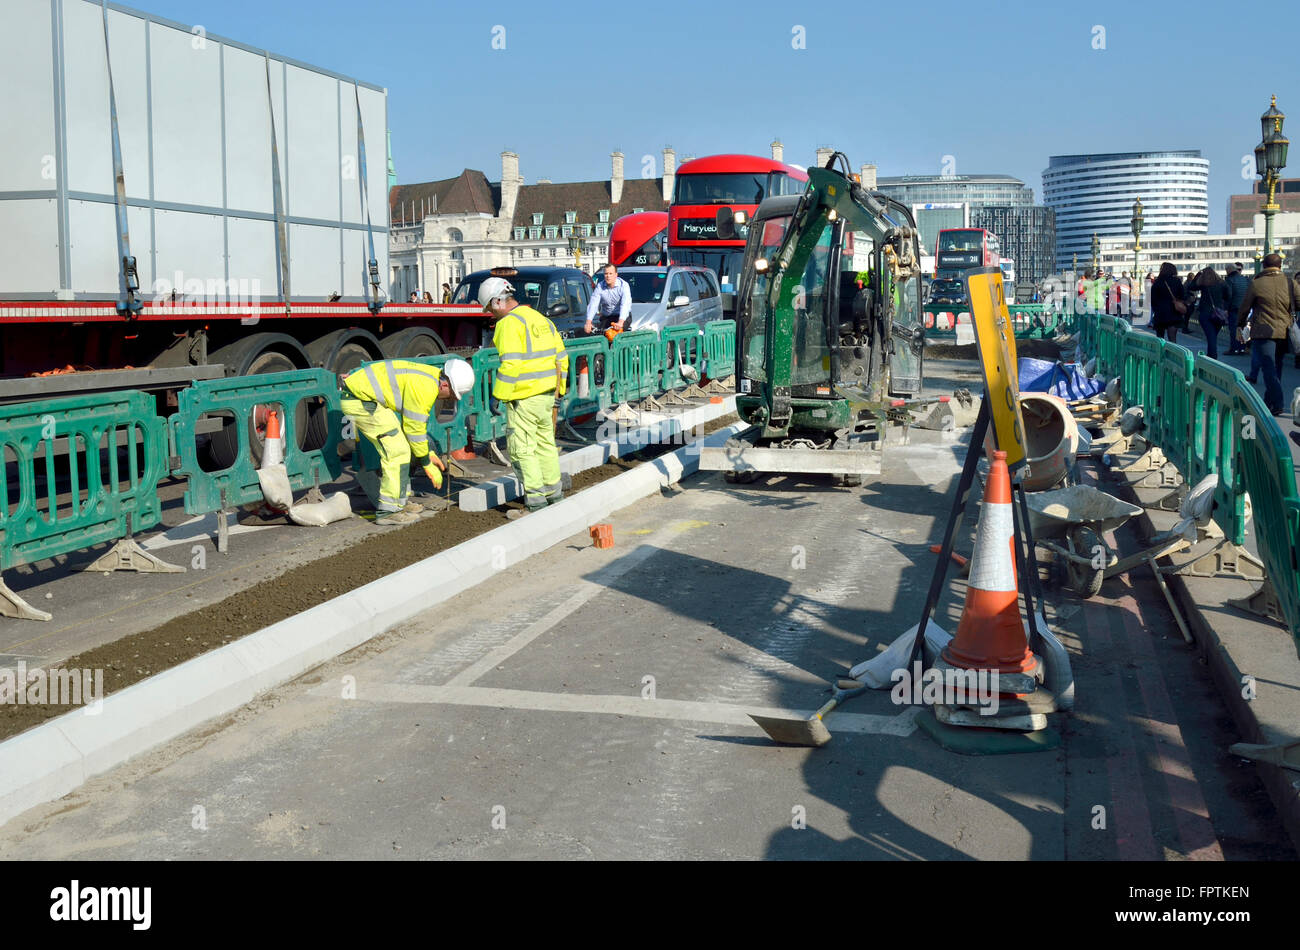 London, England, UK. Constructing a new cycle lane on Westminster Bridge, March 2016 the cycle 'Superhighway' Stock Photo